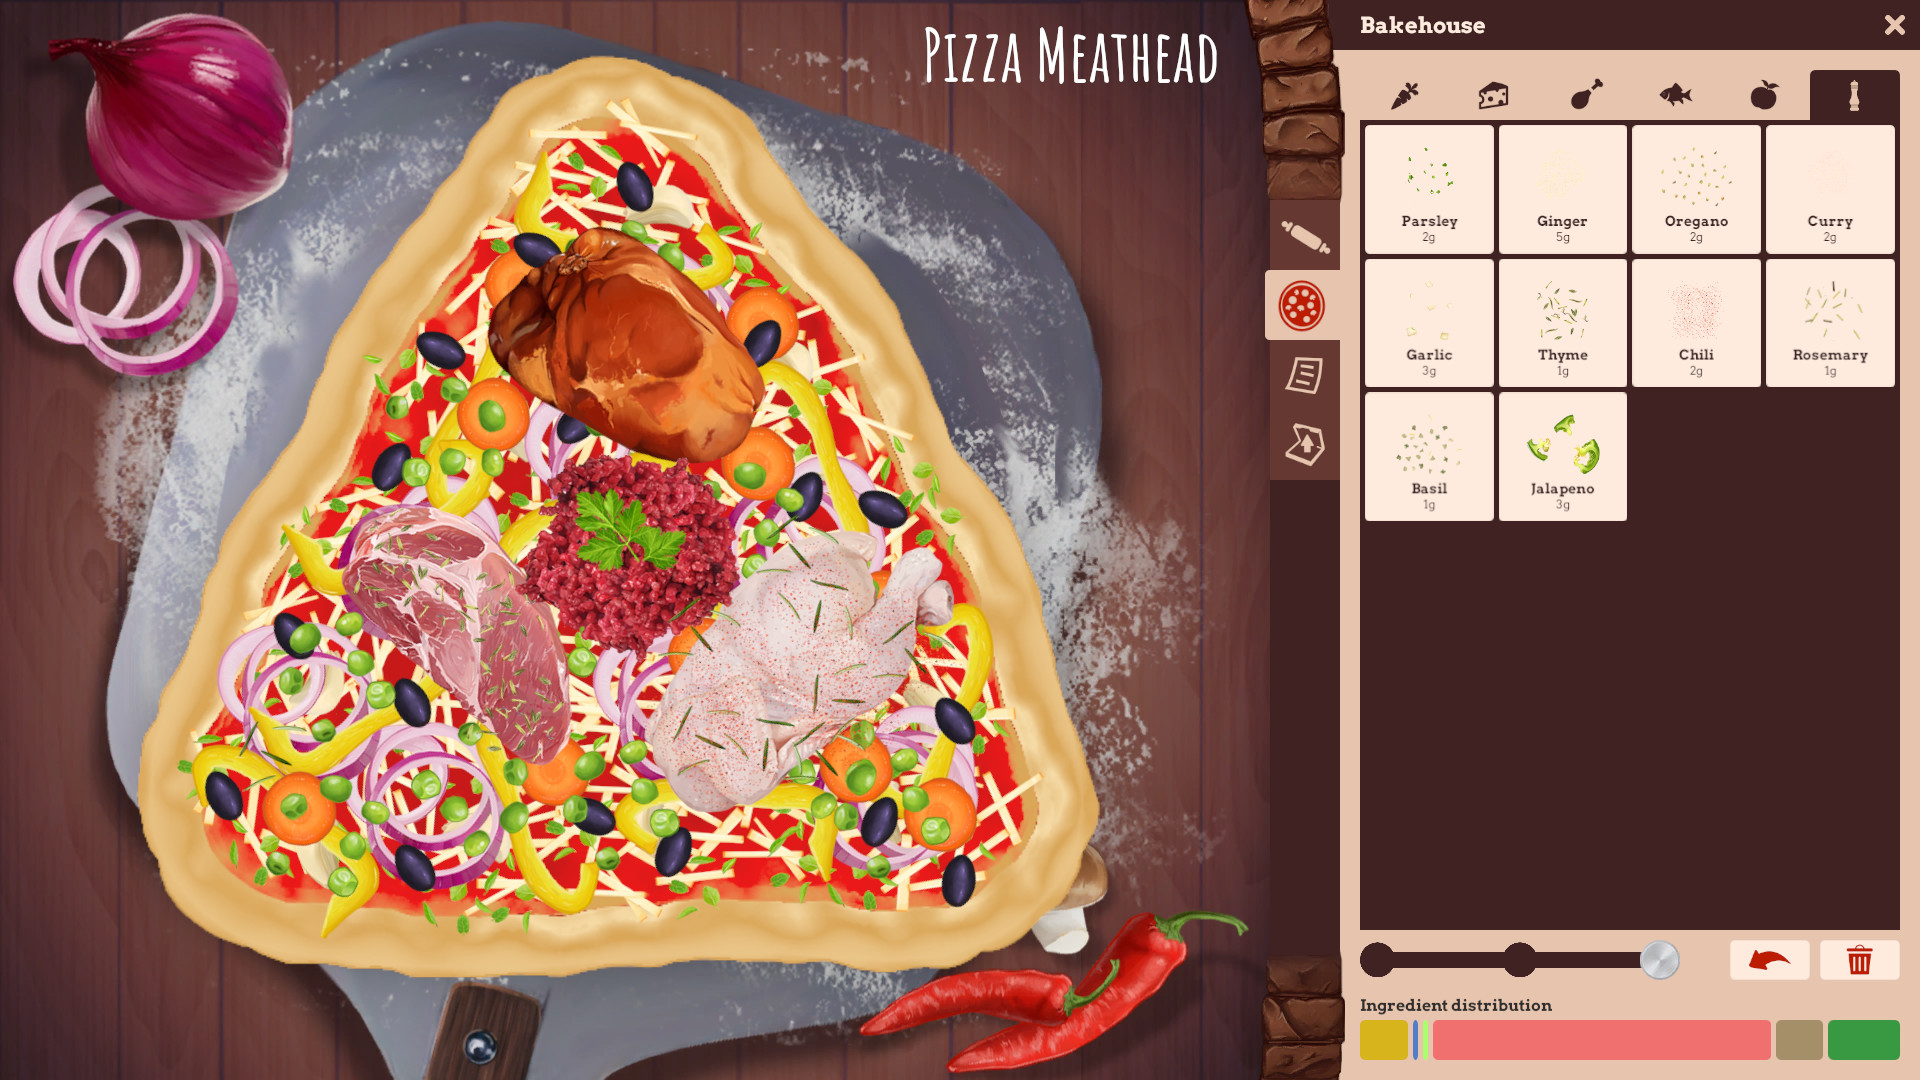 download pizza connection game